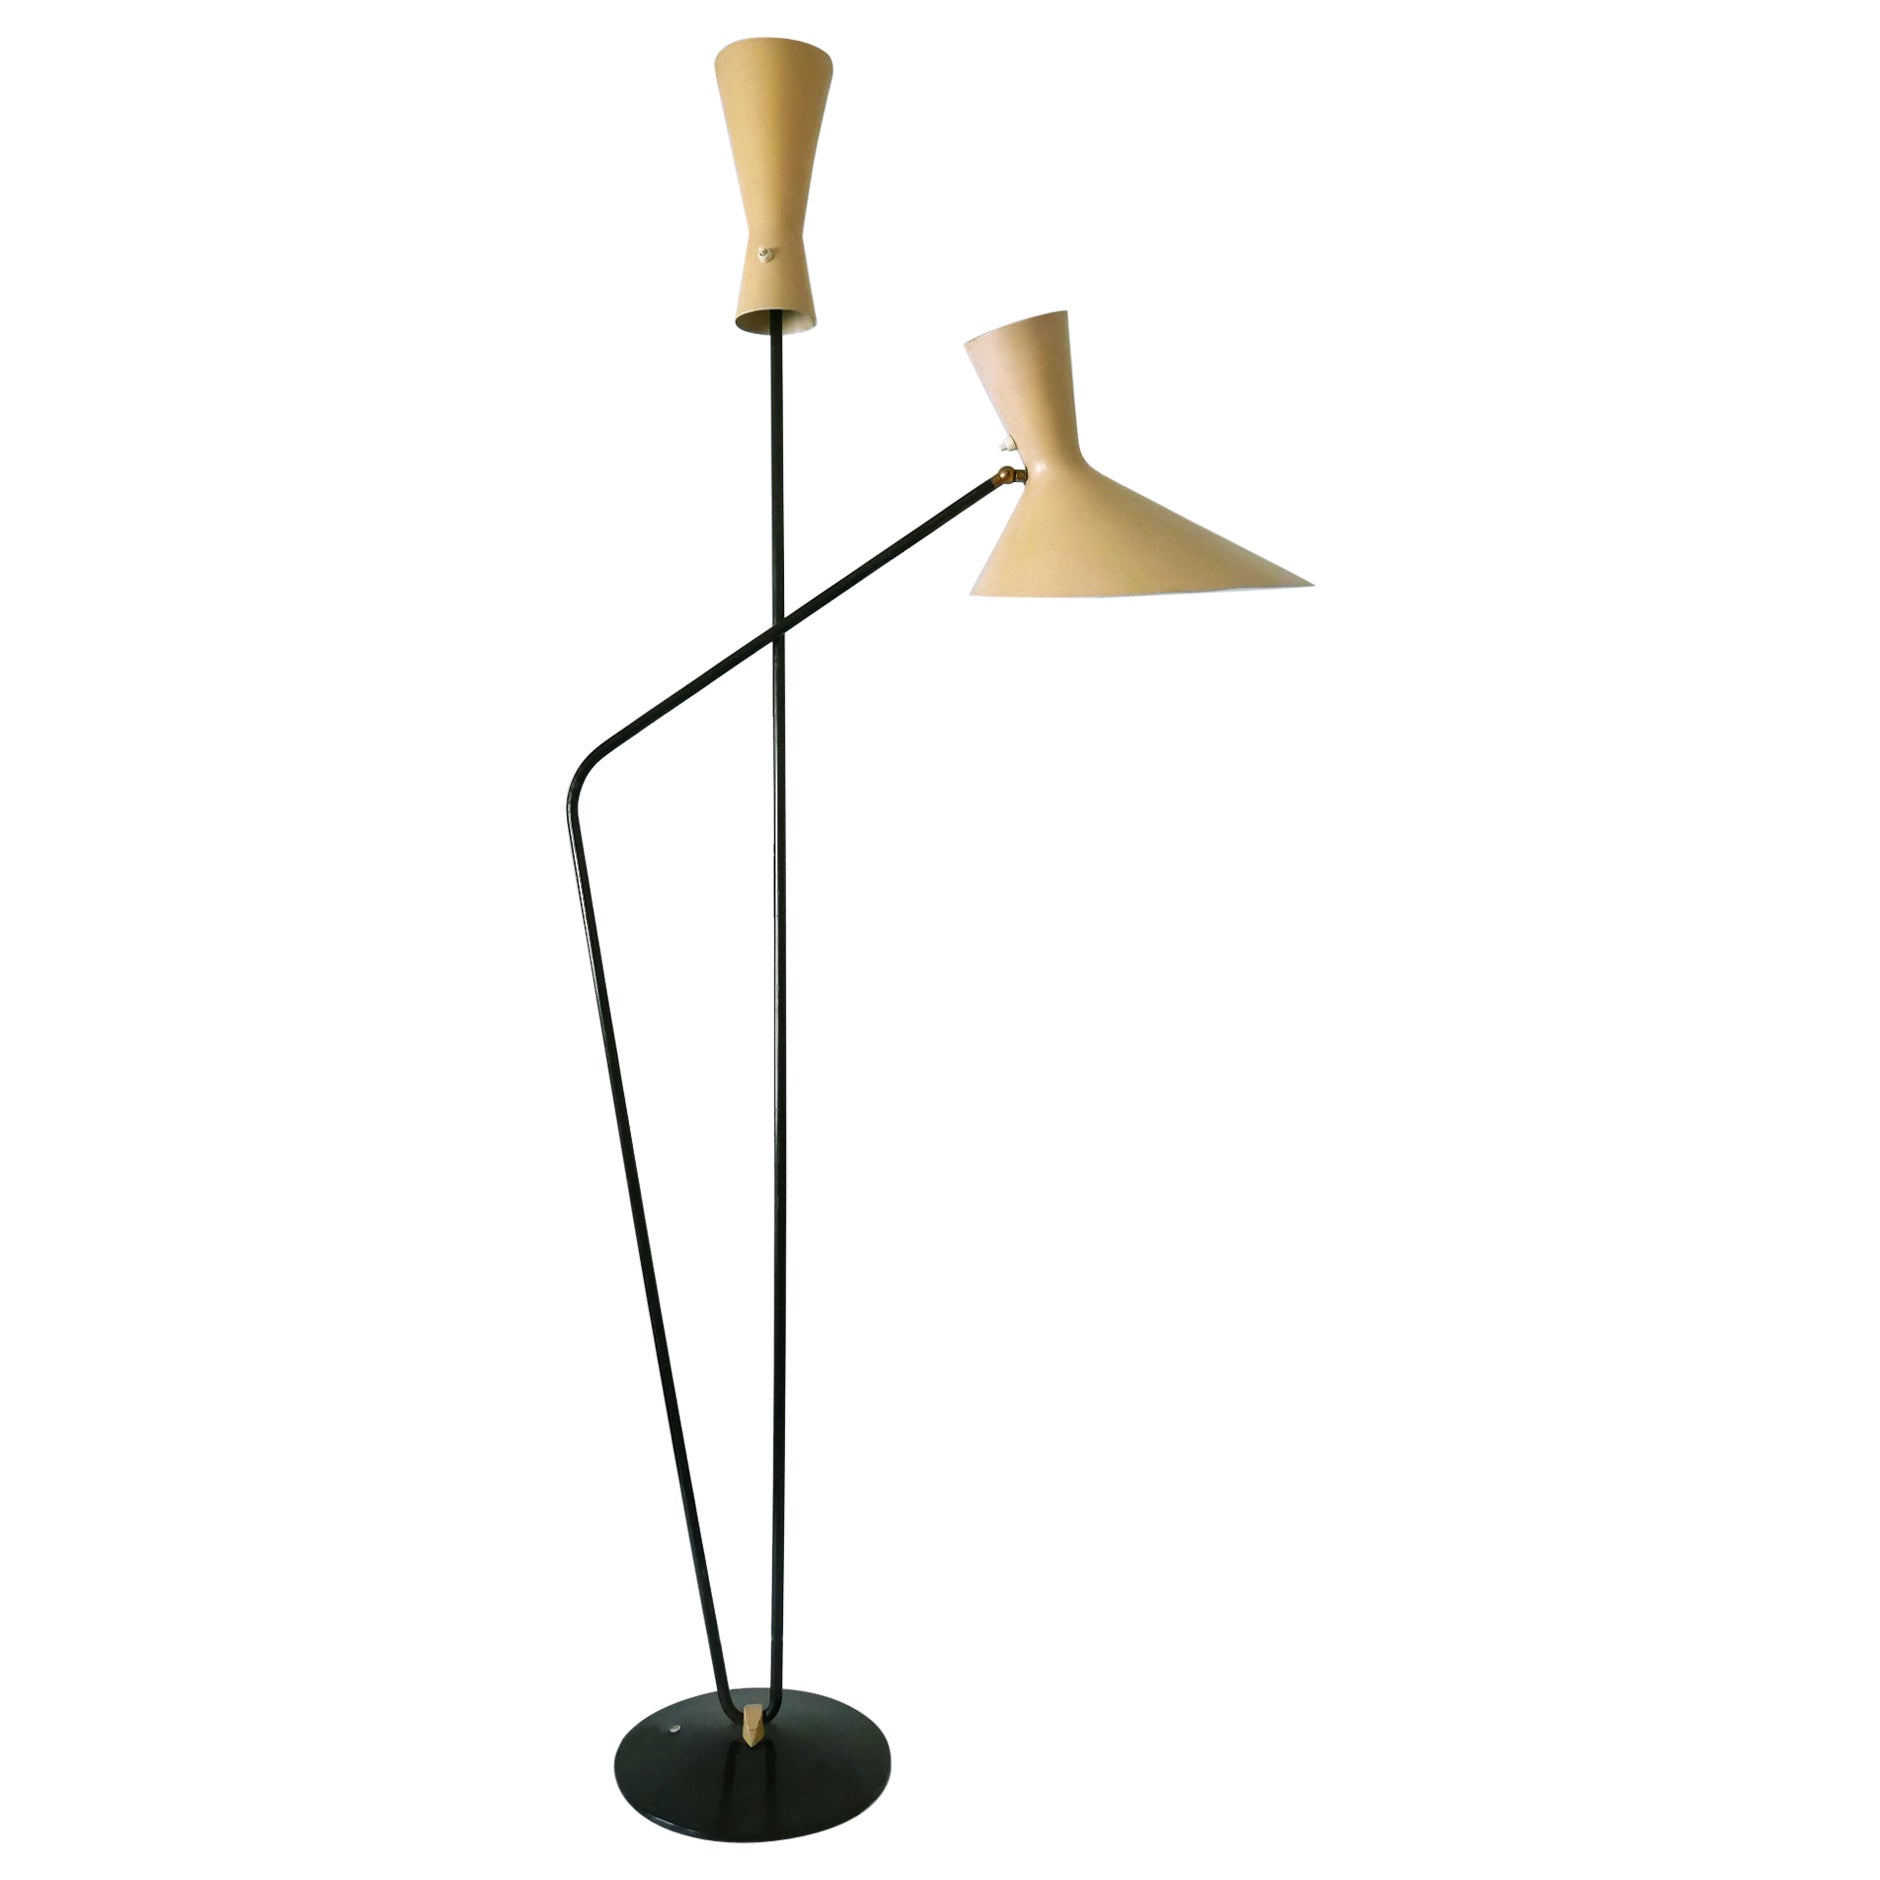 Rare Iconic Mid-Century Modern Floor Lamp by Prof. Carl Moor for BAG Turgi 1950s For Sale